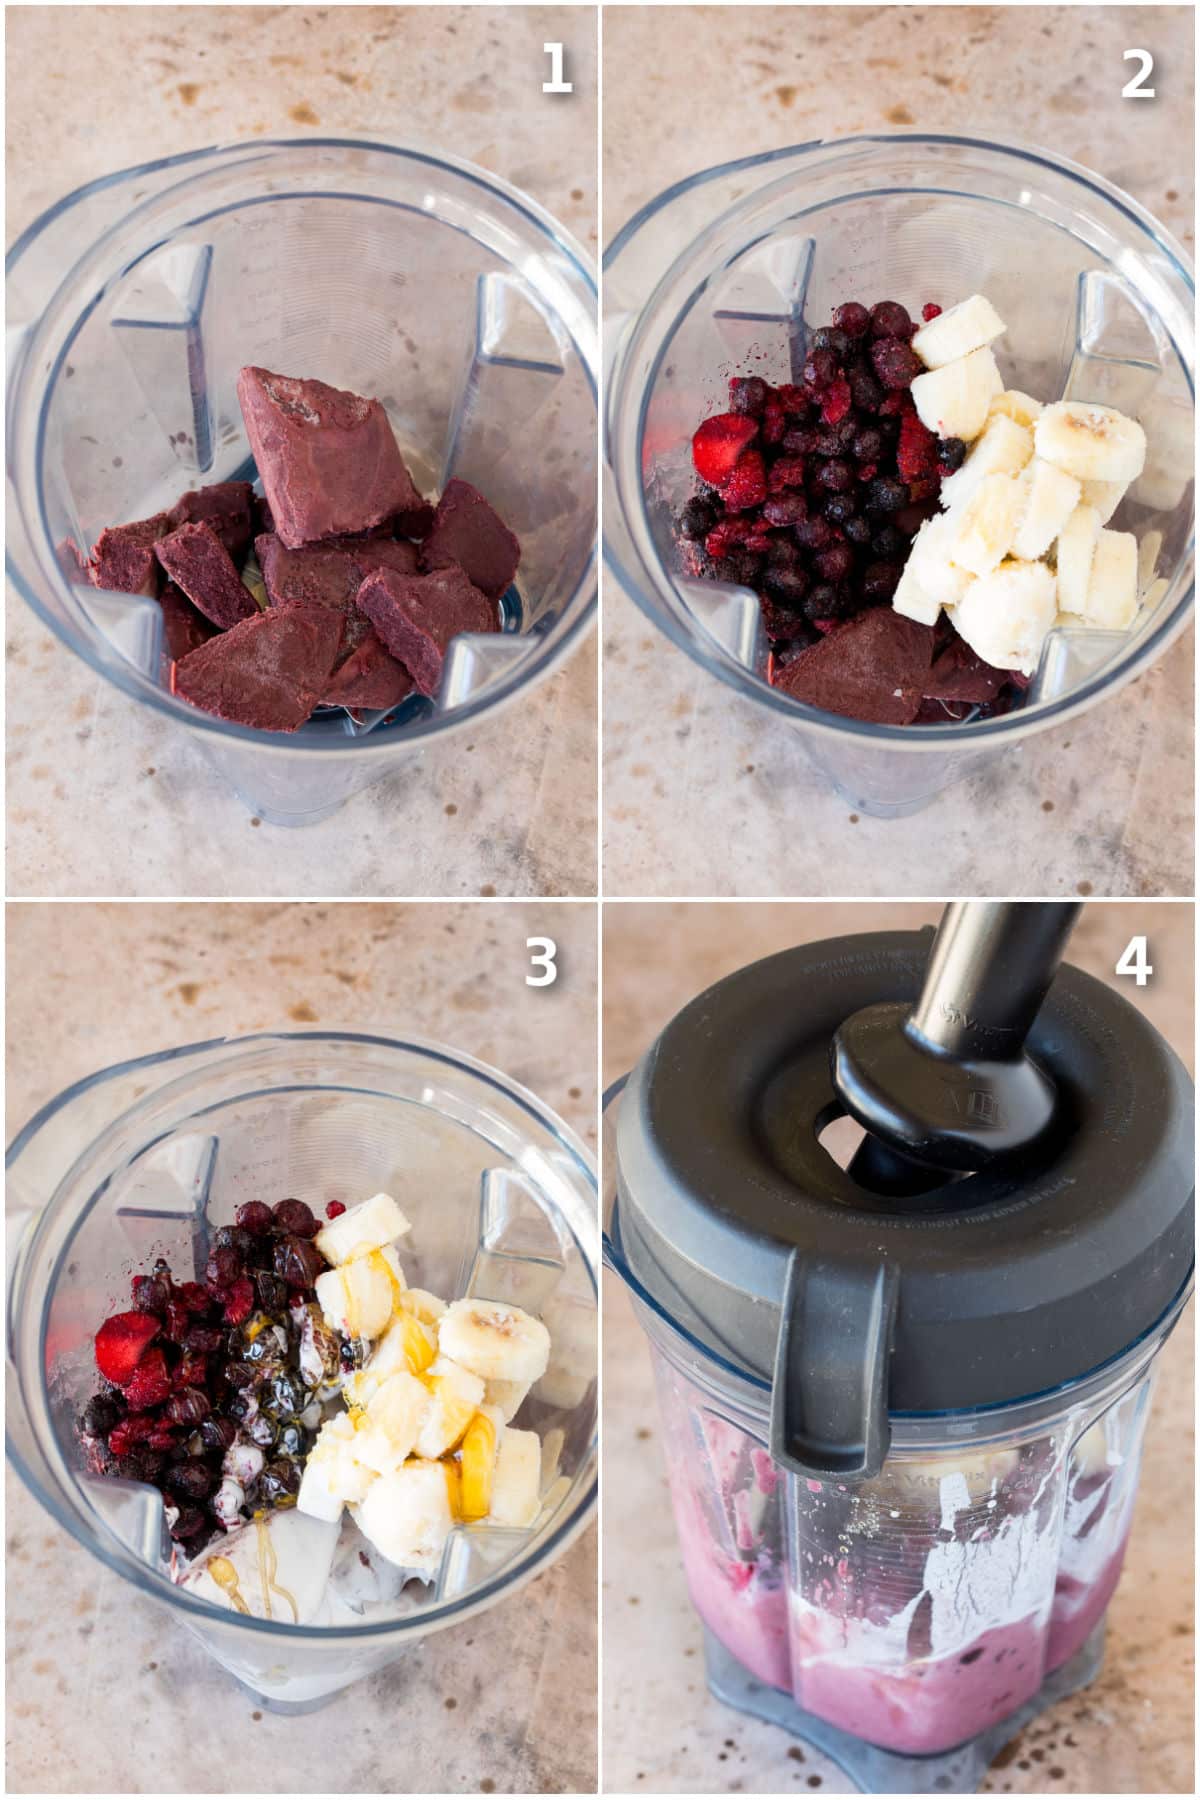 Step by step process shots showing how to make an acai bowl.